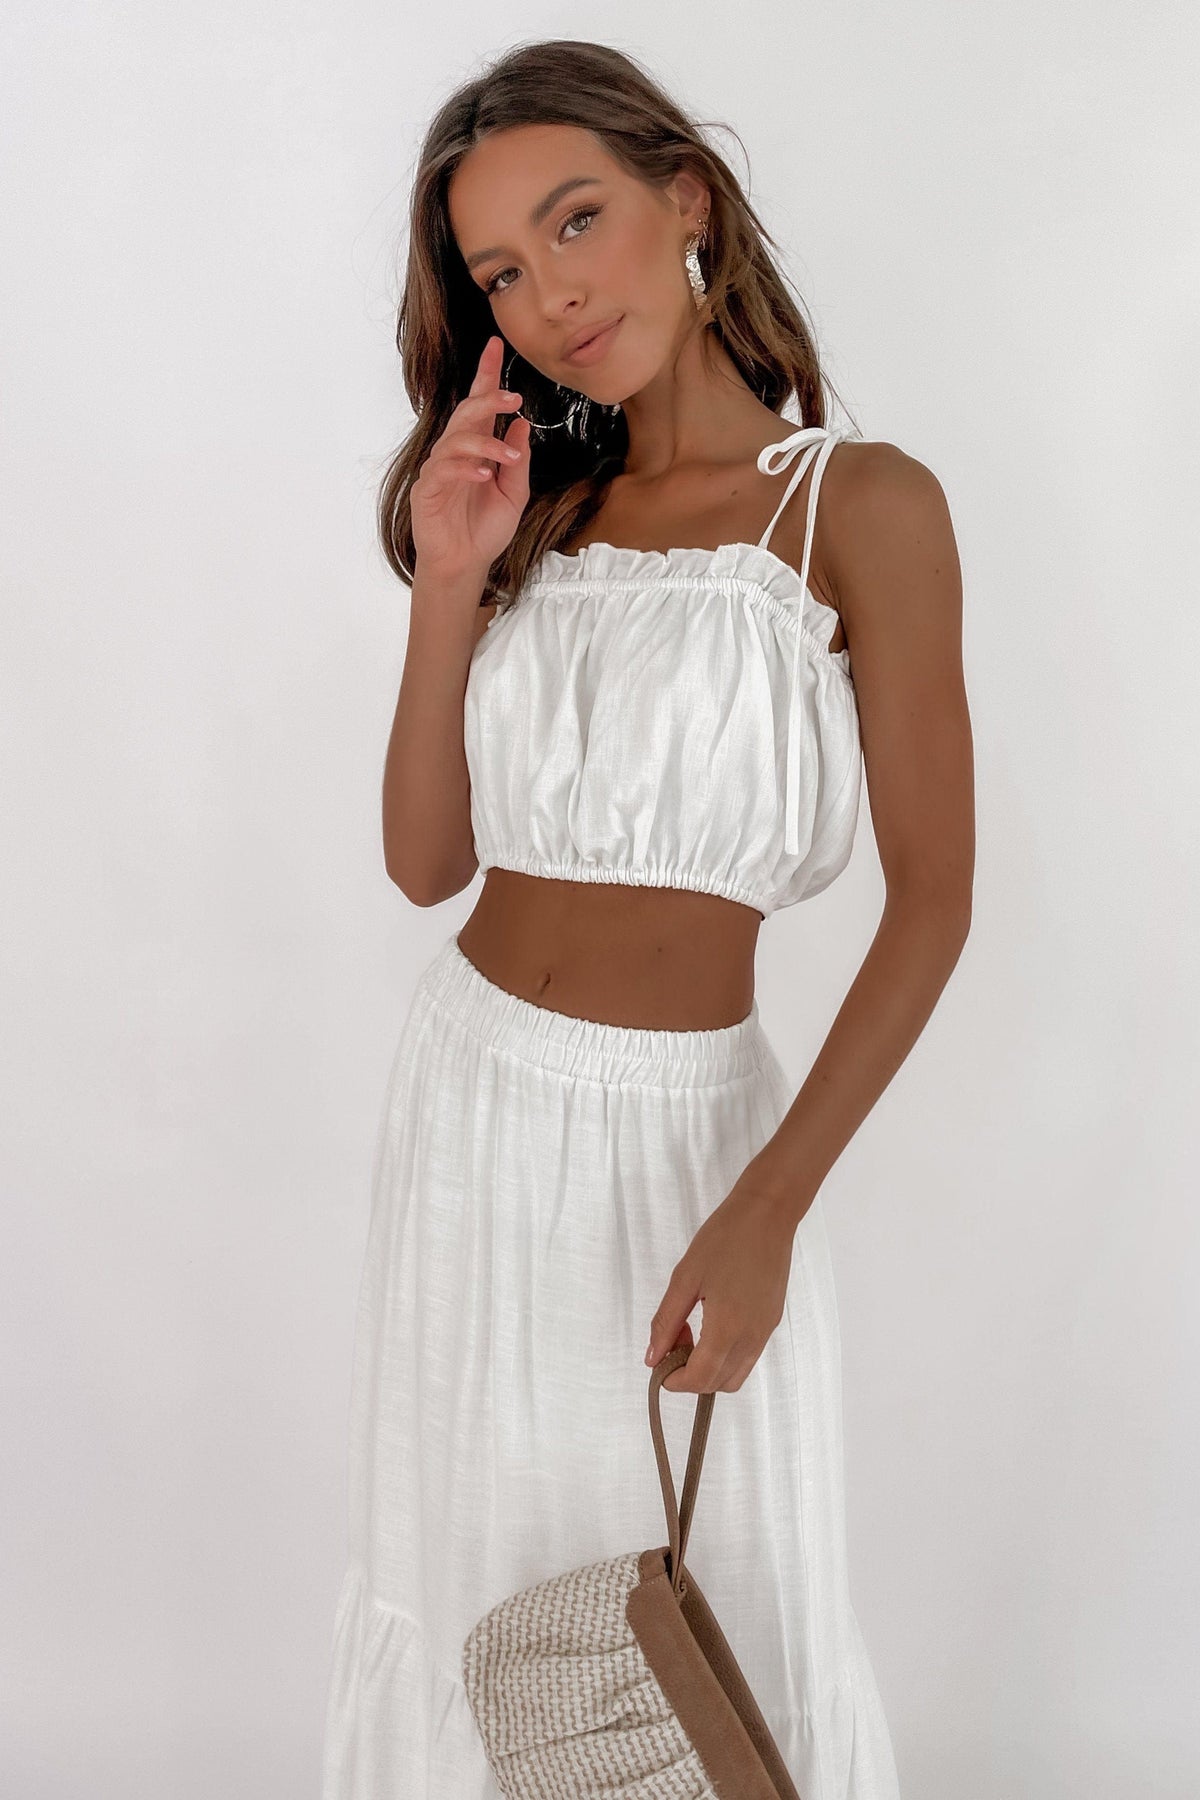 Plunge Top, CROP TOPS, LINEN &amp; RAYON, LINEN AND RAYON, RAYON &amp; LINEN, RAYON AND LINEN, Sale, TOP, TOPS, WHITE, Our New Plunge Top Is Now Only $51.00 Exclusive At Mishkah, Our New Plunge Top is now only $51.00-We Have The Latest Women&#39;s Tops @ Mishkah Online Fashion Boutique-MISHKAH